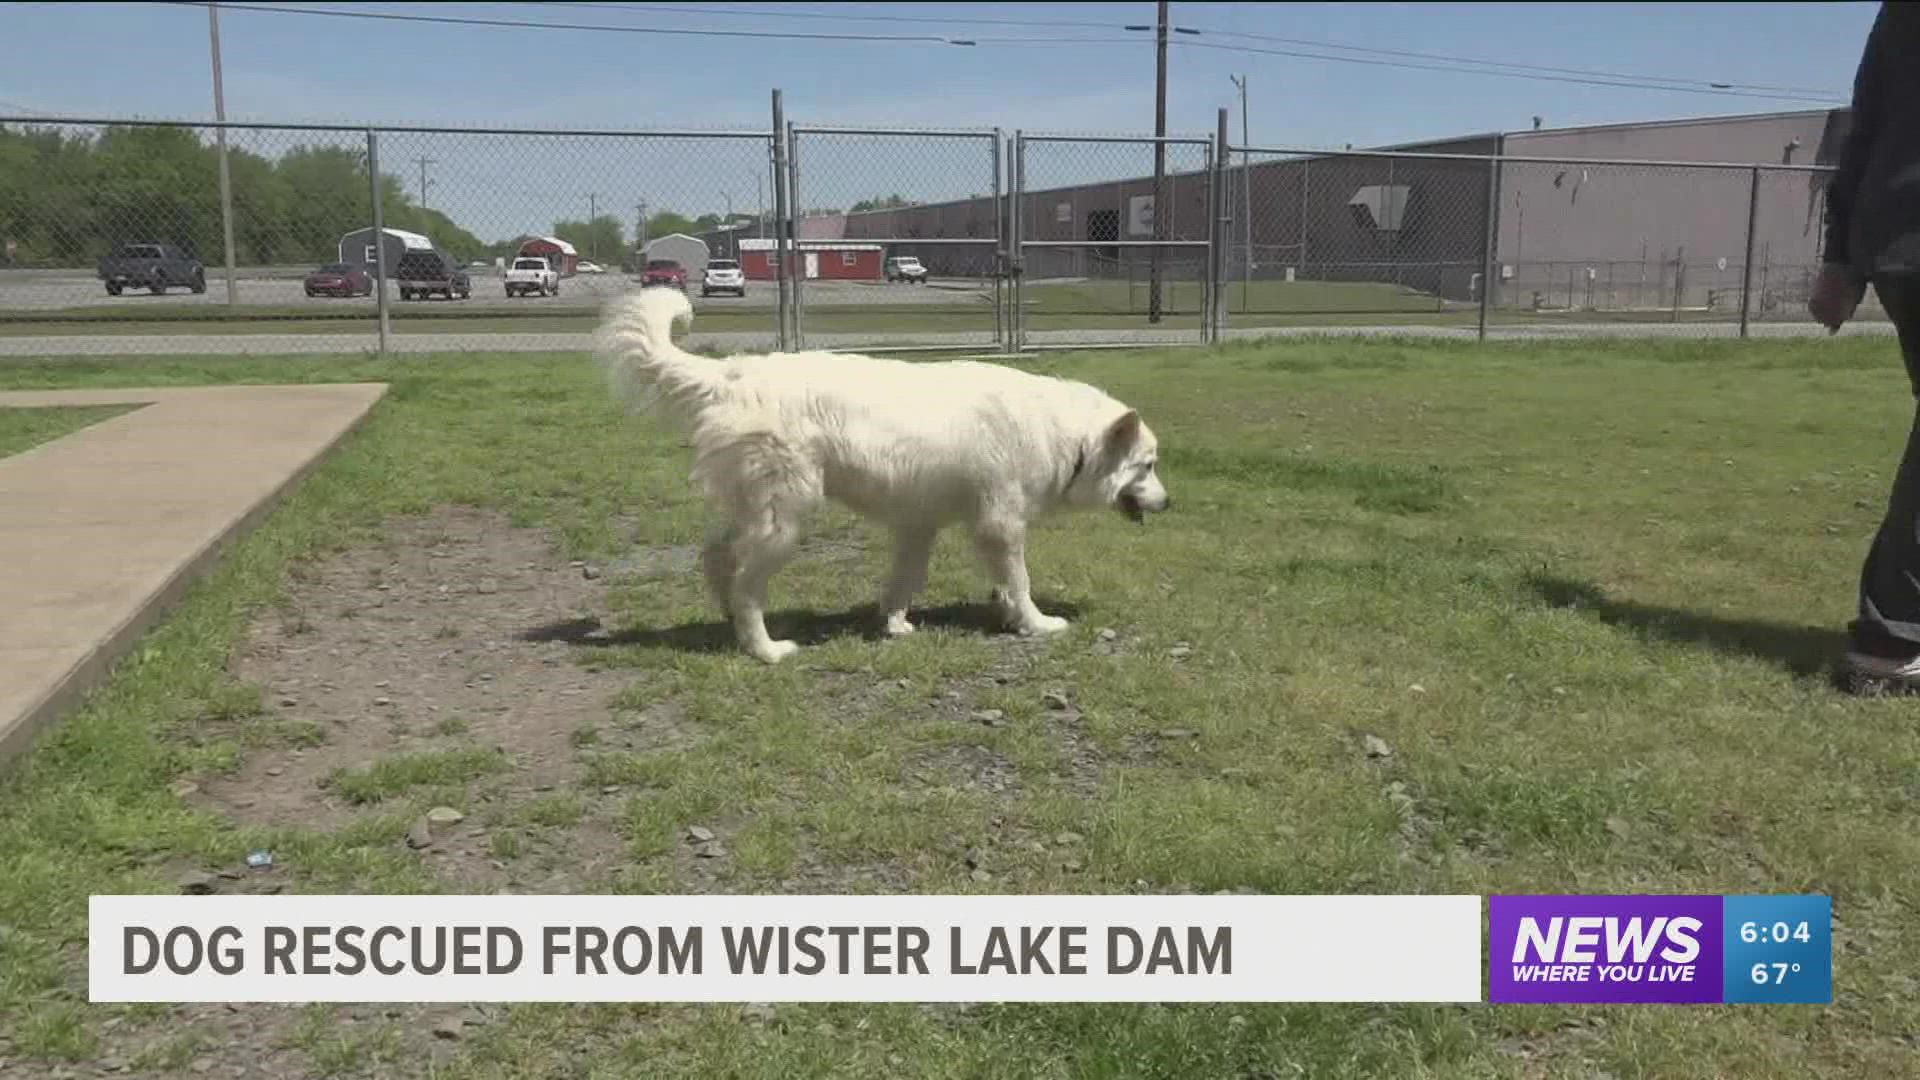 After seeing a Facebook post of a dog stuck in a Lake Wister Dam, Wister Fire Department members sprang into action and conducted a rescue.